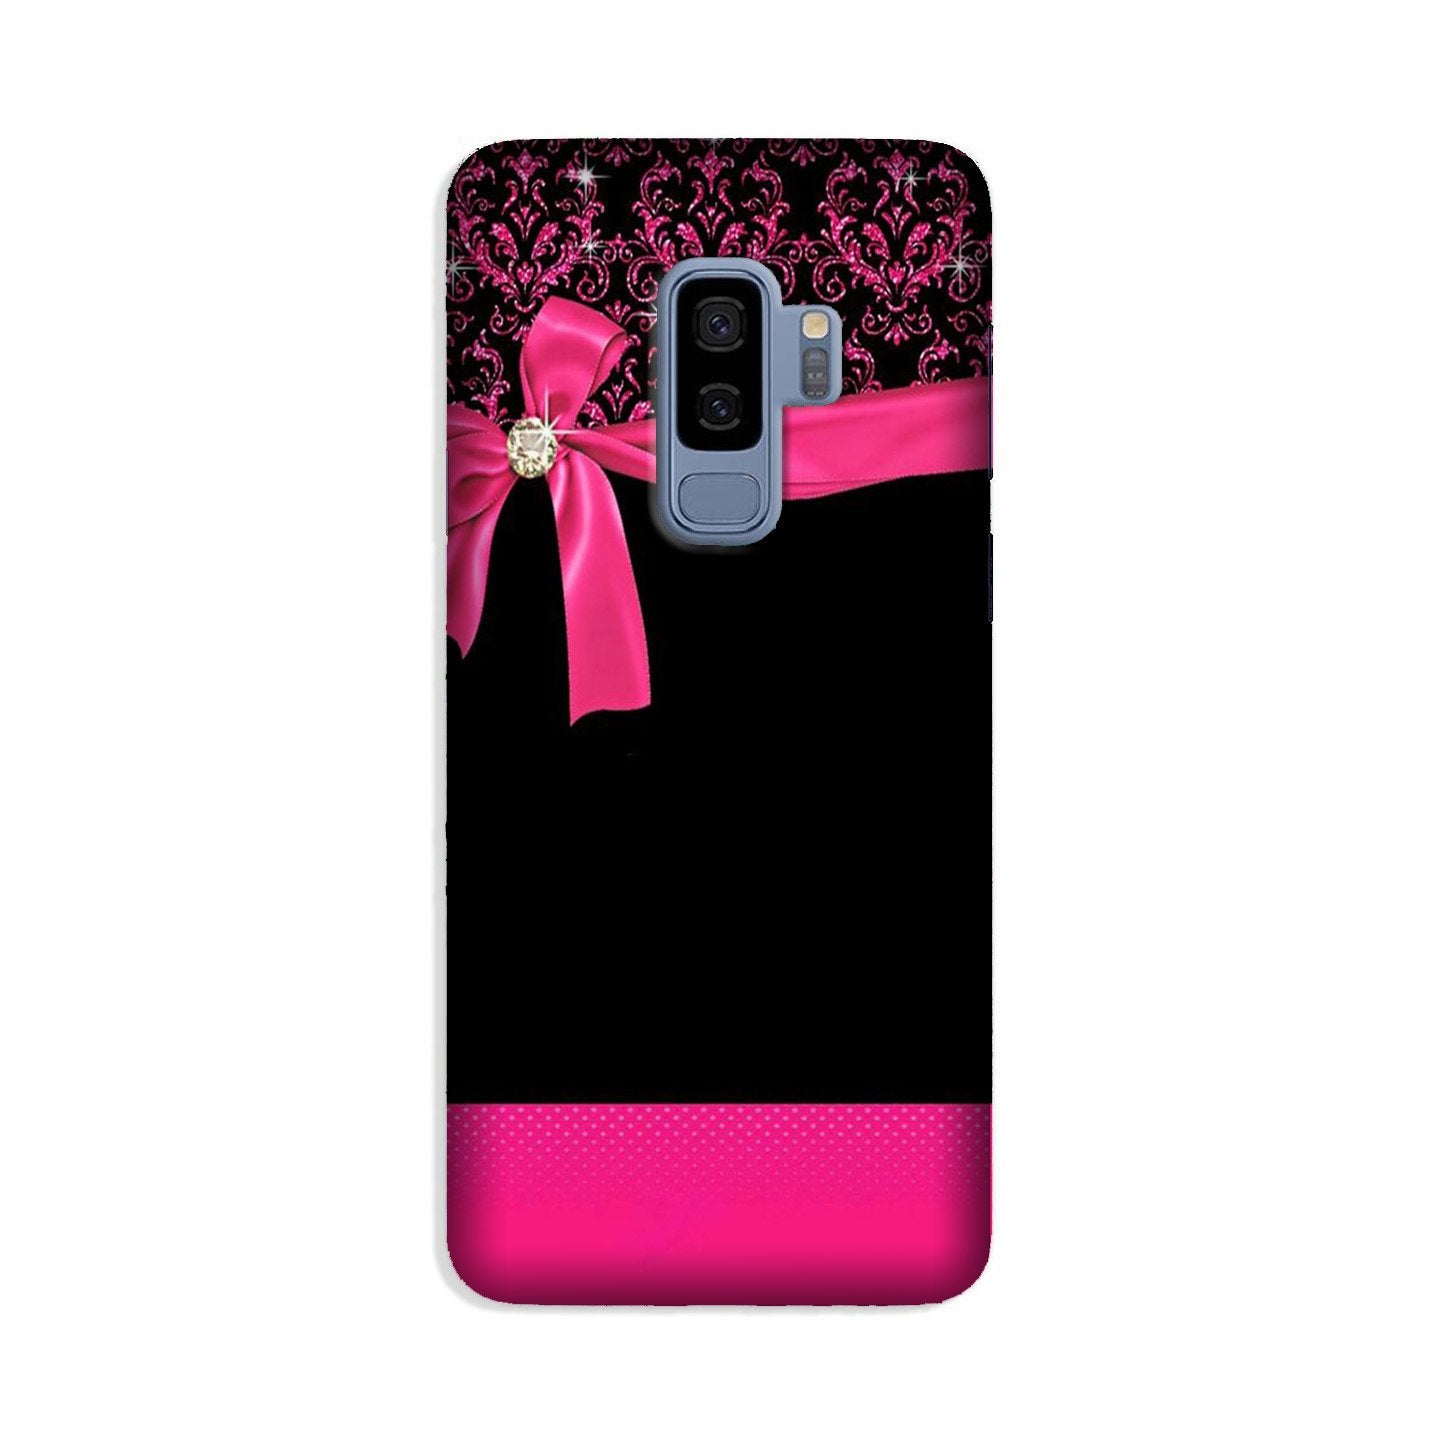 Gift Wrap4 Case for Galaxy S9 Plus